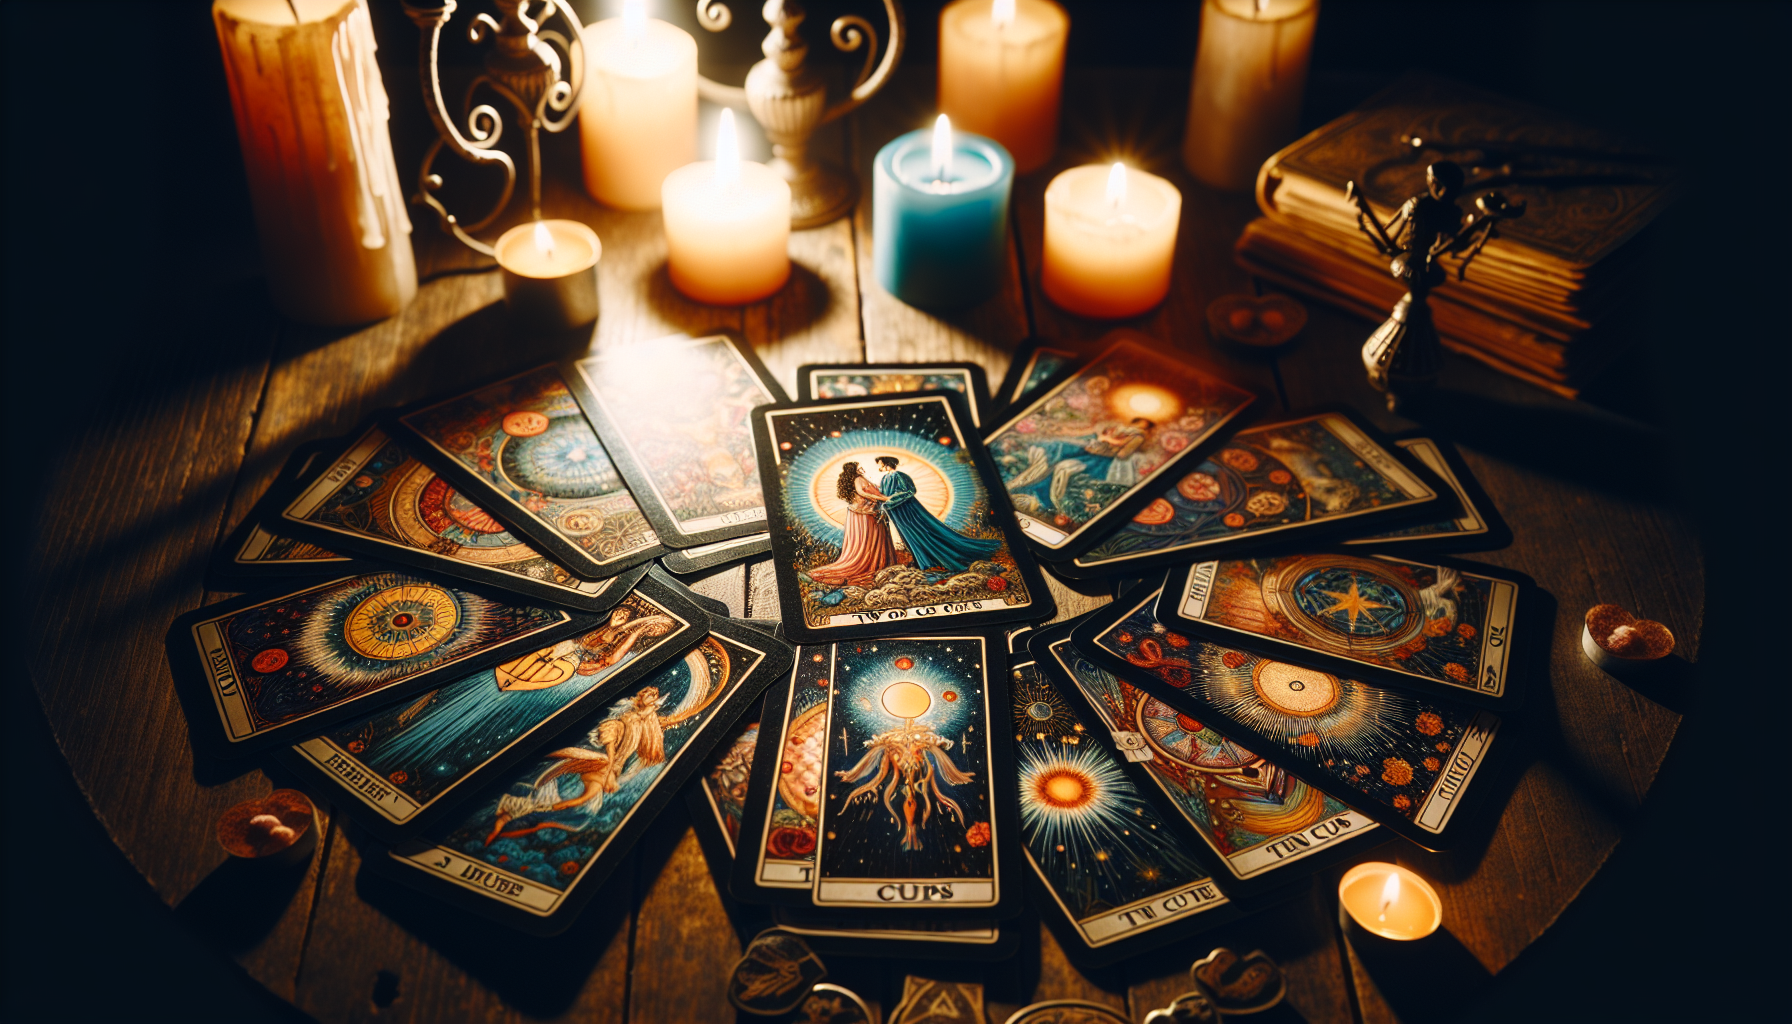 Illustration of tarot cards depicting love and relationships